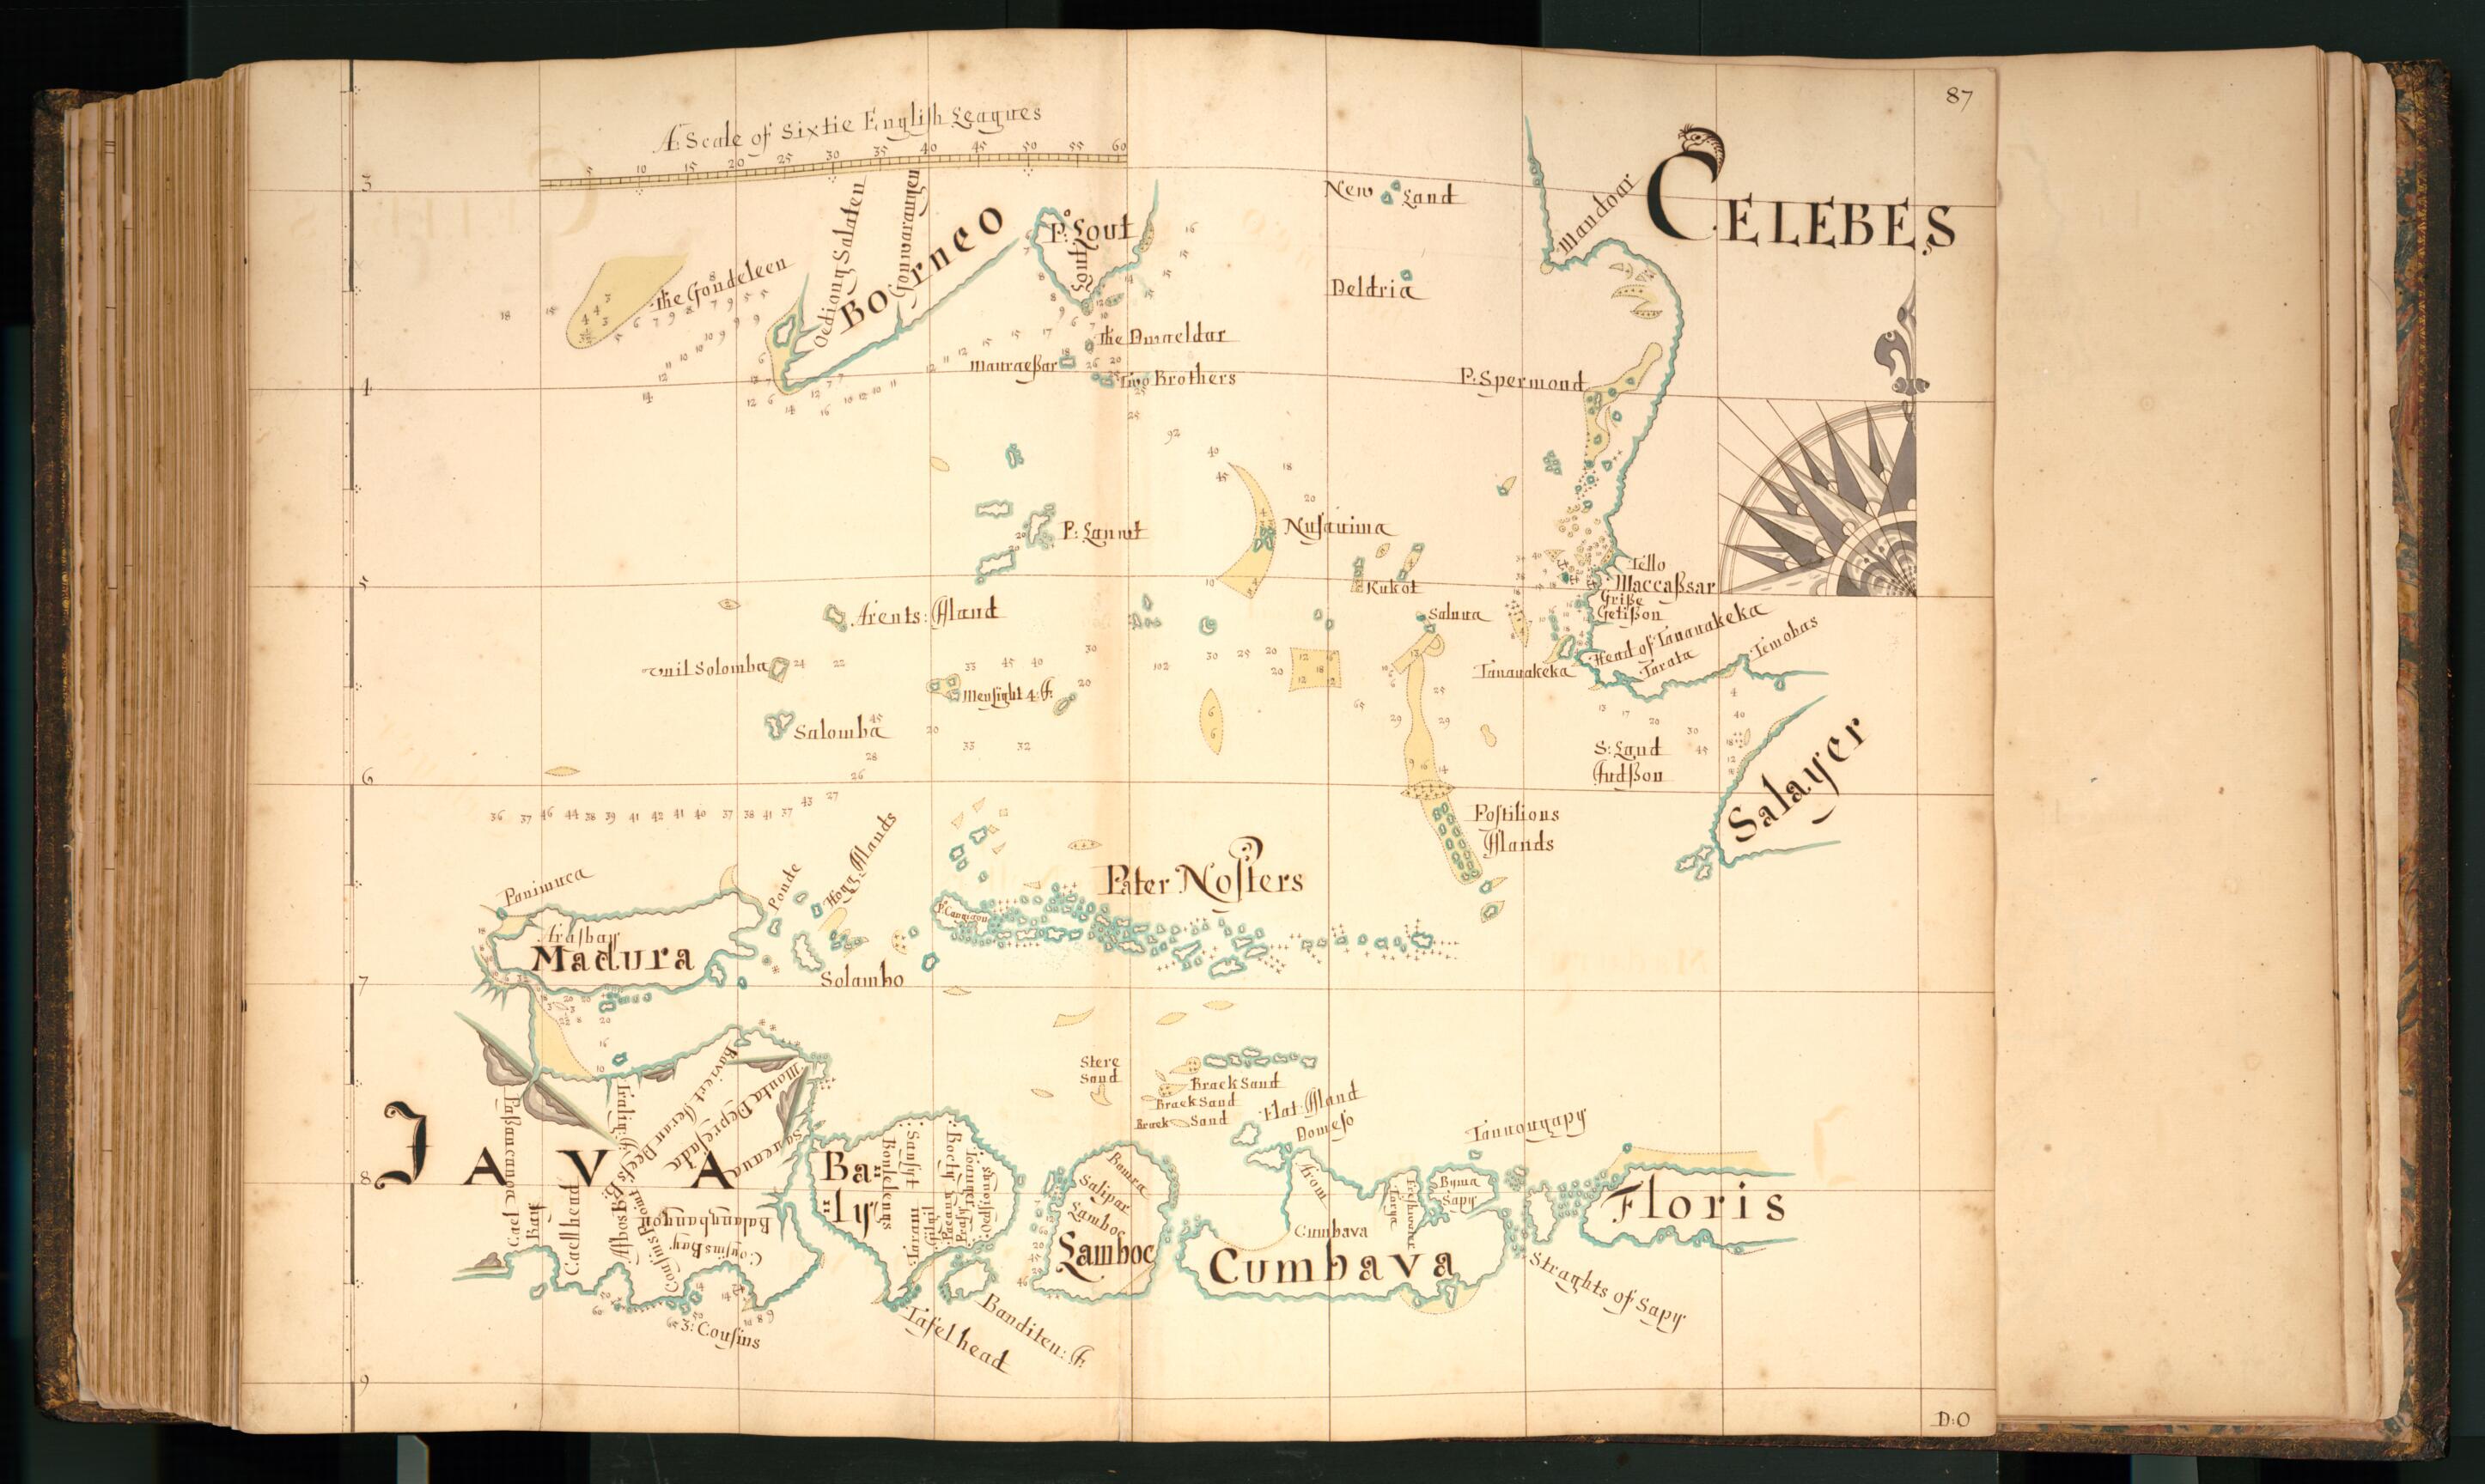 This old map of 87) Celebes, Java from Buccaneer Atlas from 1690 was created by William Hacke in 1690